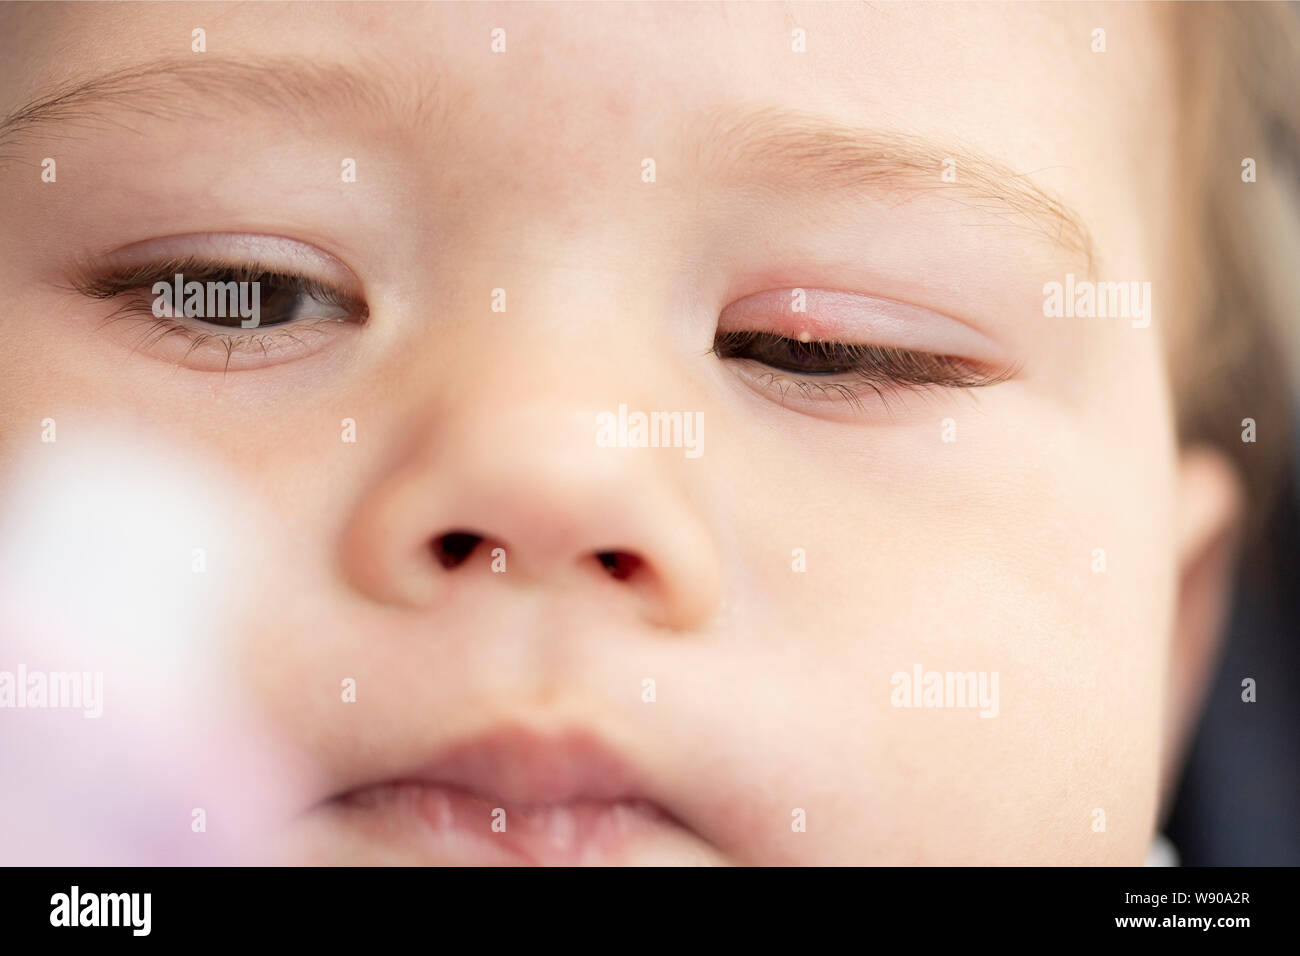 White pimple on the eyelid of a small child close-up. Inflammation of the eye milium conjunctivitis. Inflammation of the upper eyelid soft focus Stock Photo